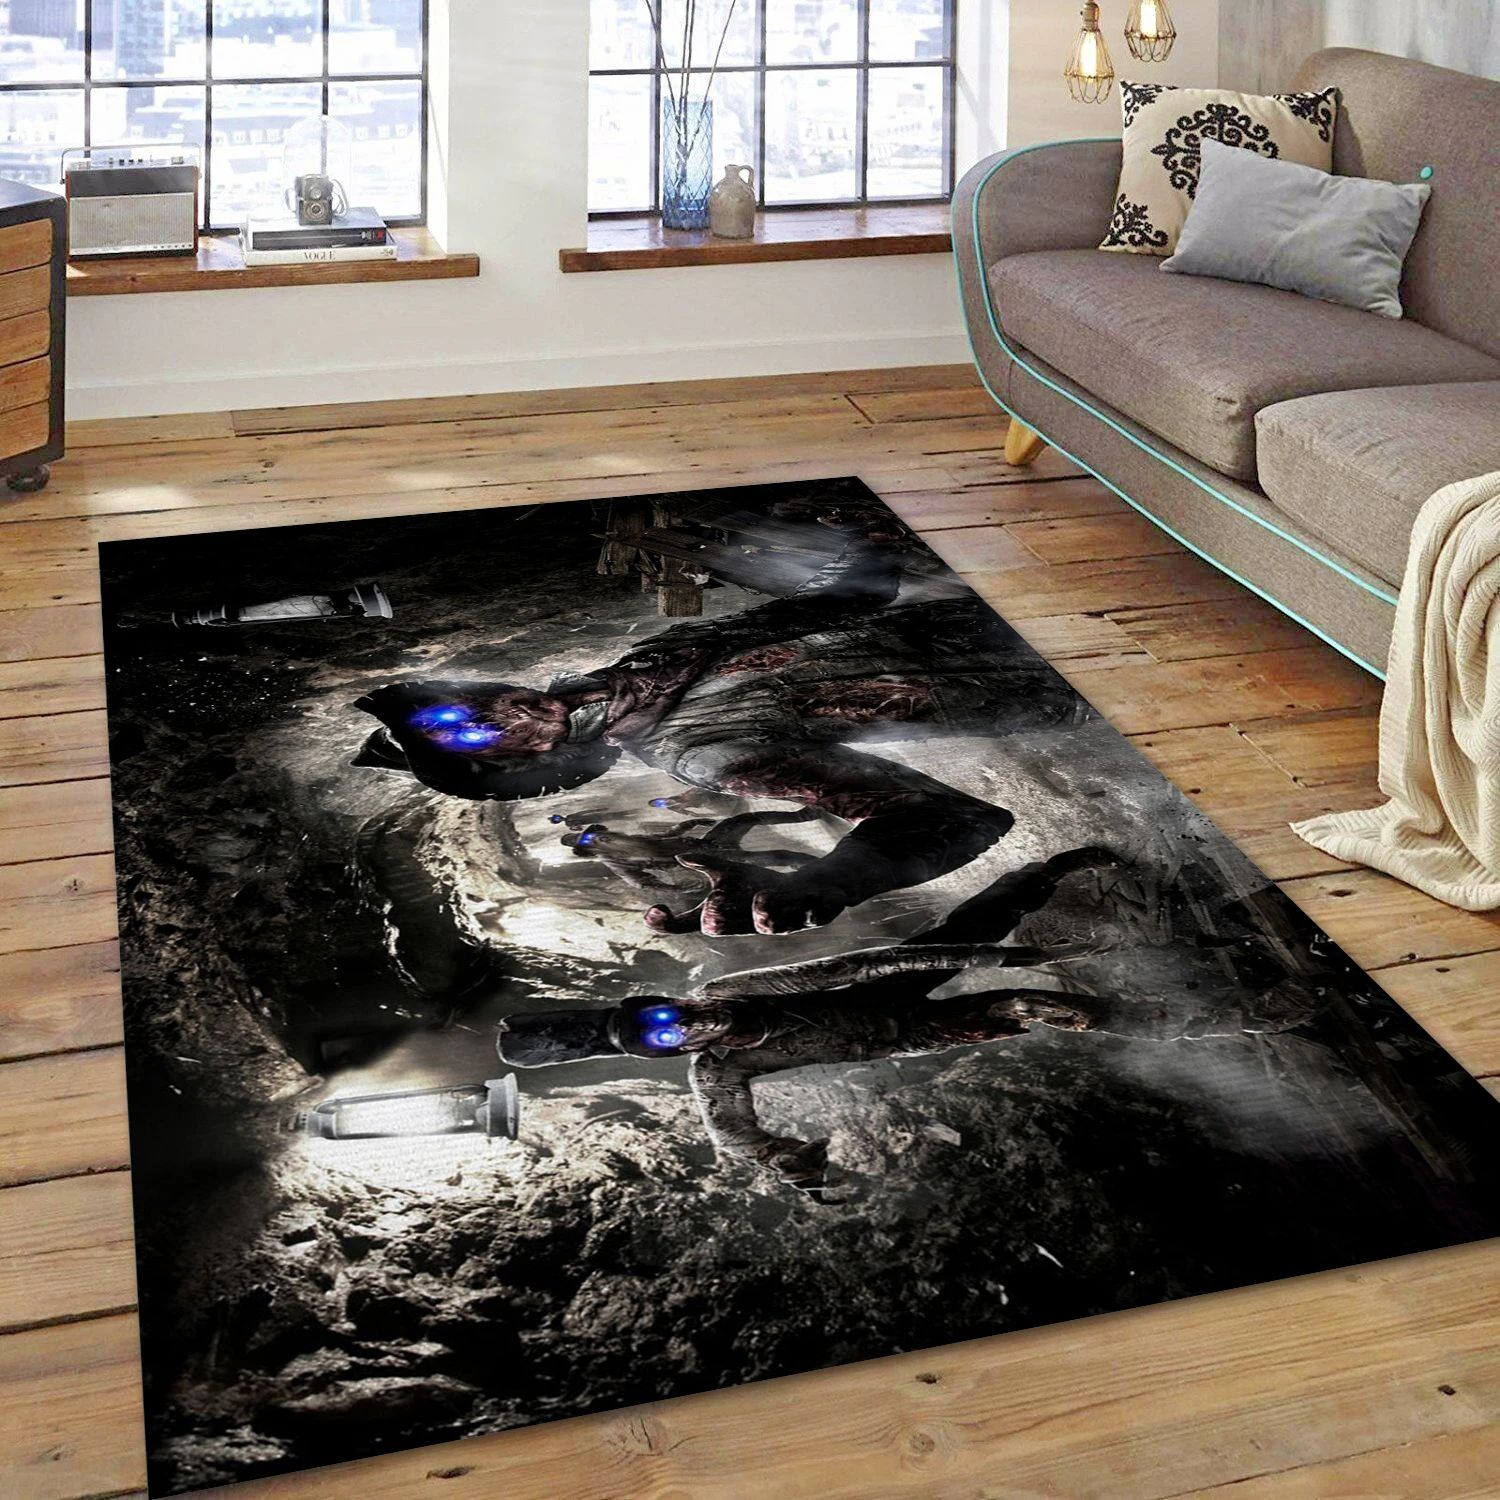 Call Of Duty Black Ops Ii Video Game Area Rug For Christmas, Area Rug - Home Decor Floor Decor - Indoor Outdoor Rugs